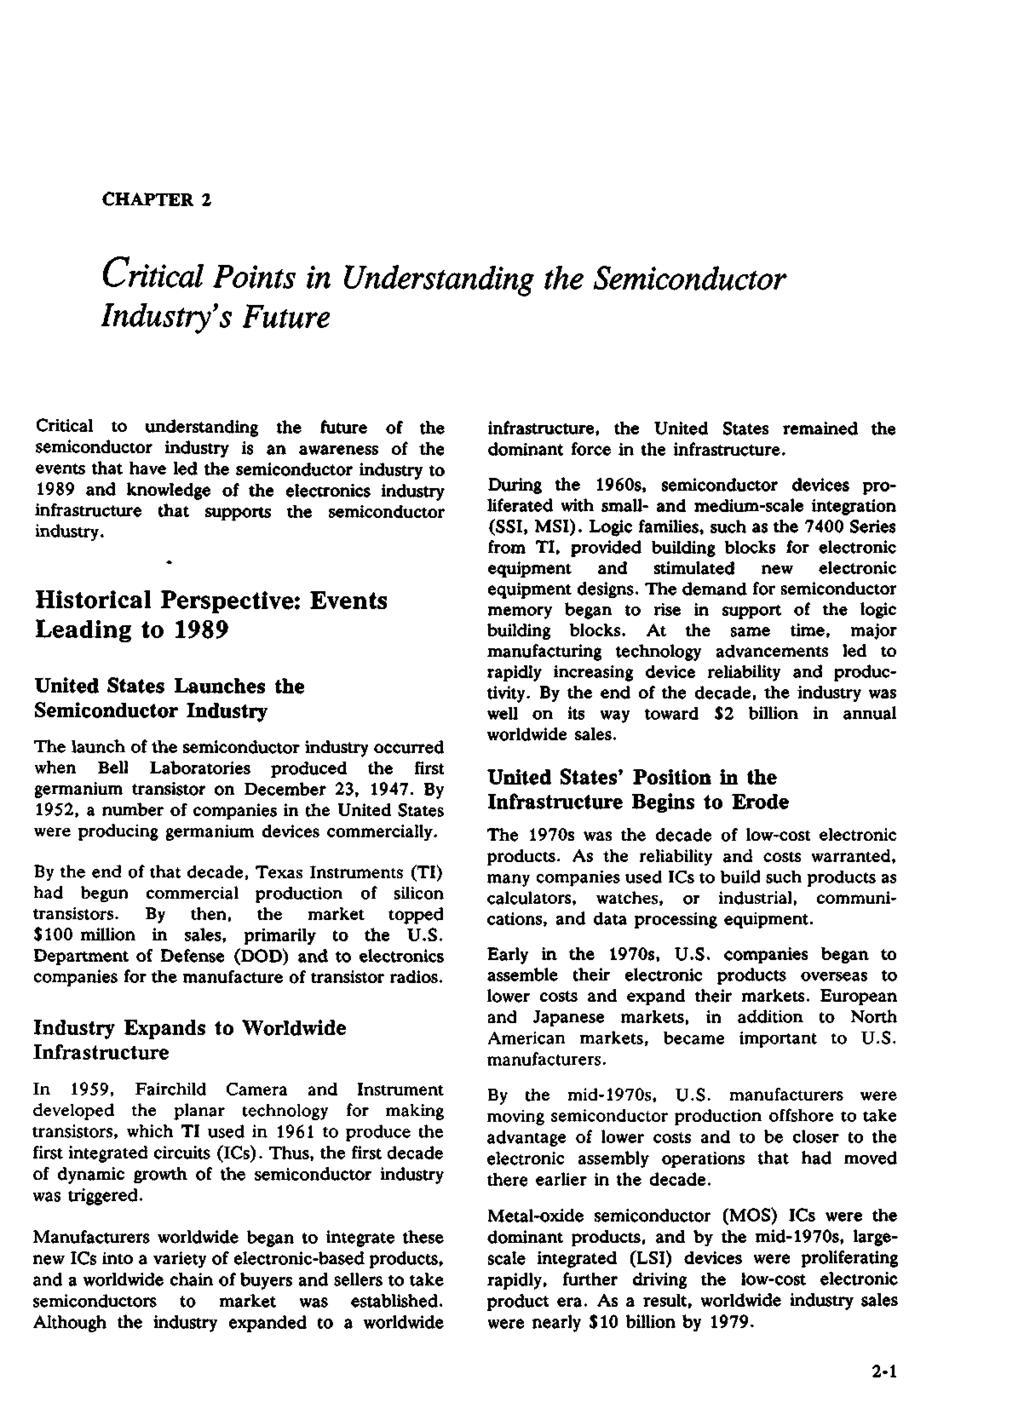 CHAPTER 2 Critical Points in Understanding the Semiconductor Industry's Future Critical to understanding the future of the semiconductor industry is an awareness of the events that have led the